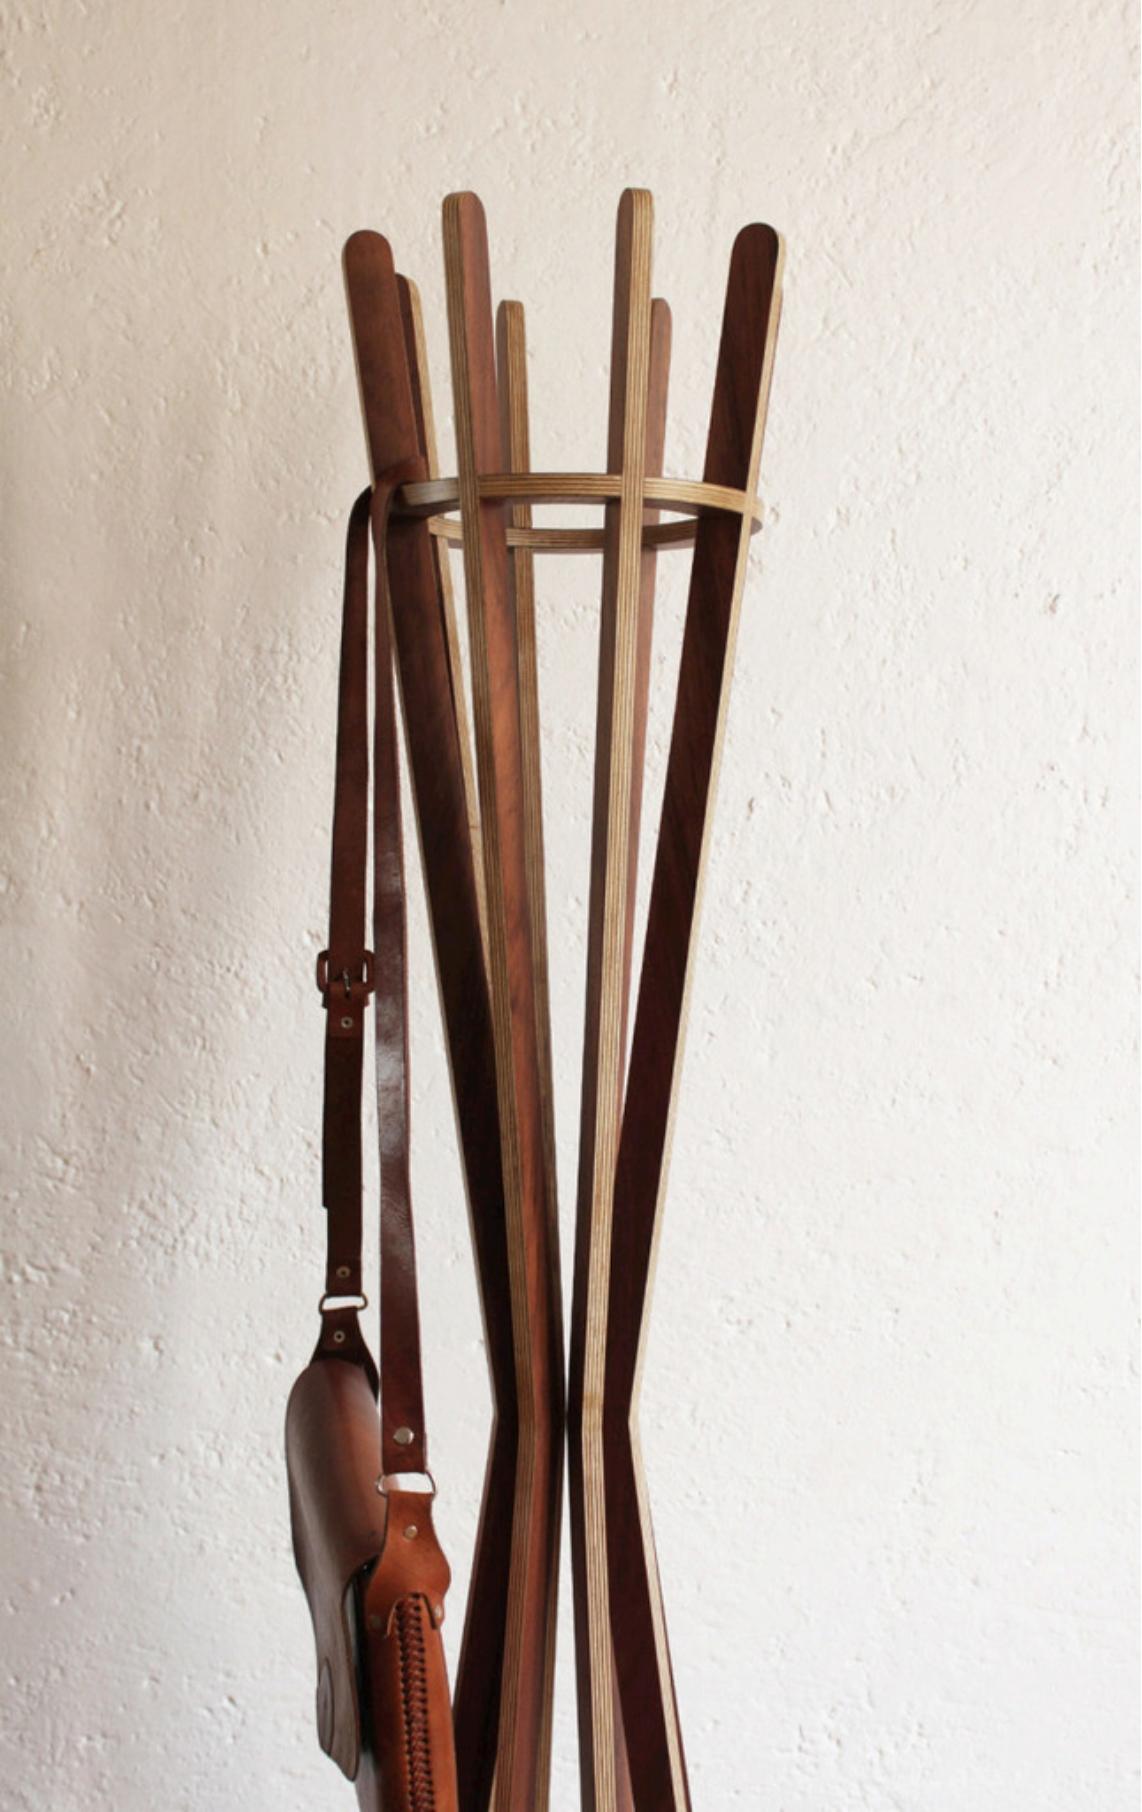 Mexican Core Coat Rack by Maria Beckmann, Represented by Tuleste Factory For Sale